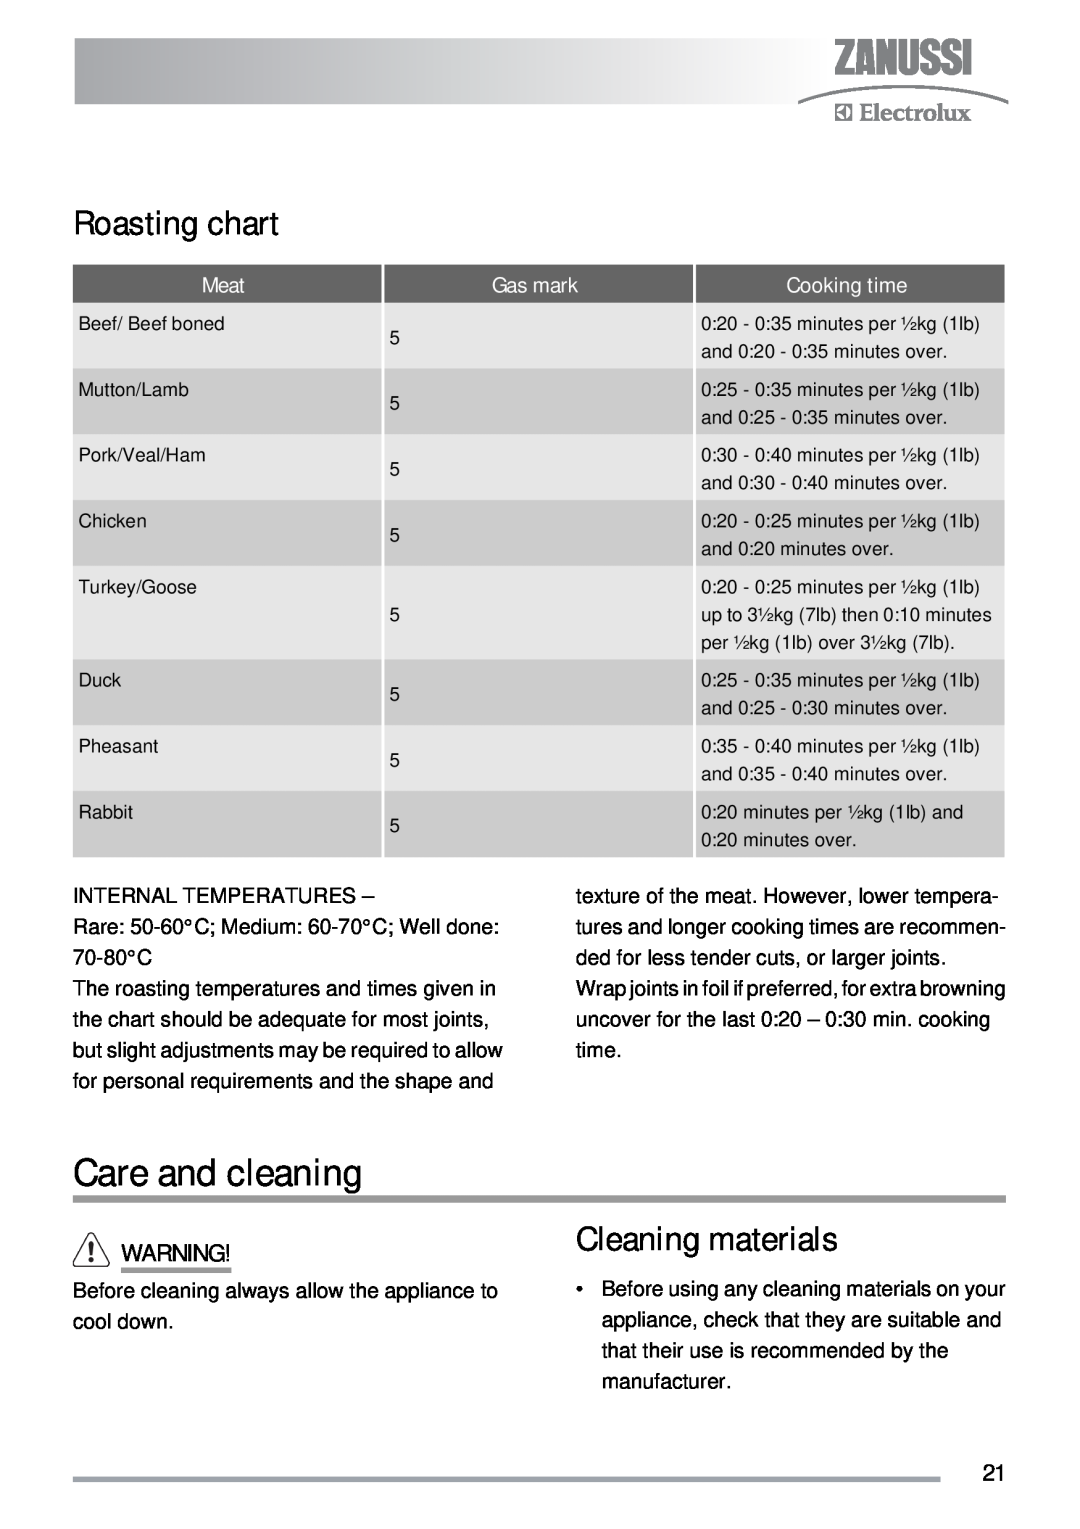 Zanussi ZKG5030 manual Care and cleaning, Roasting chart, Cleaning materials 